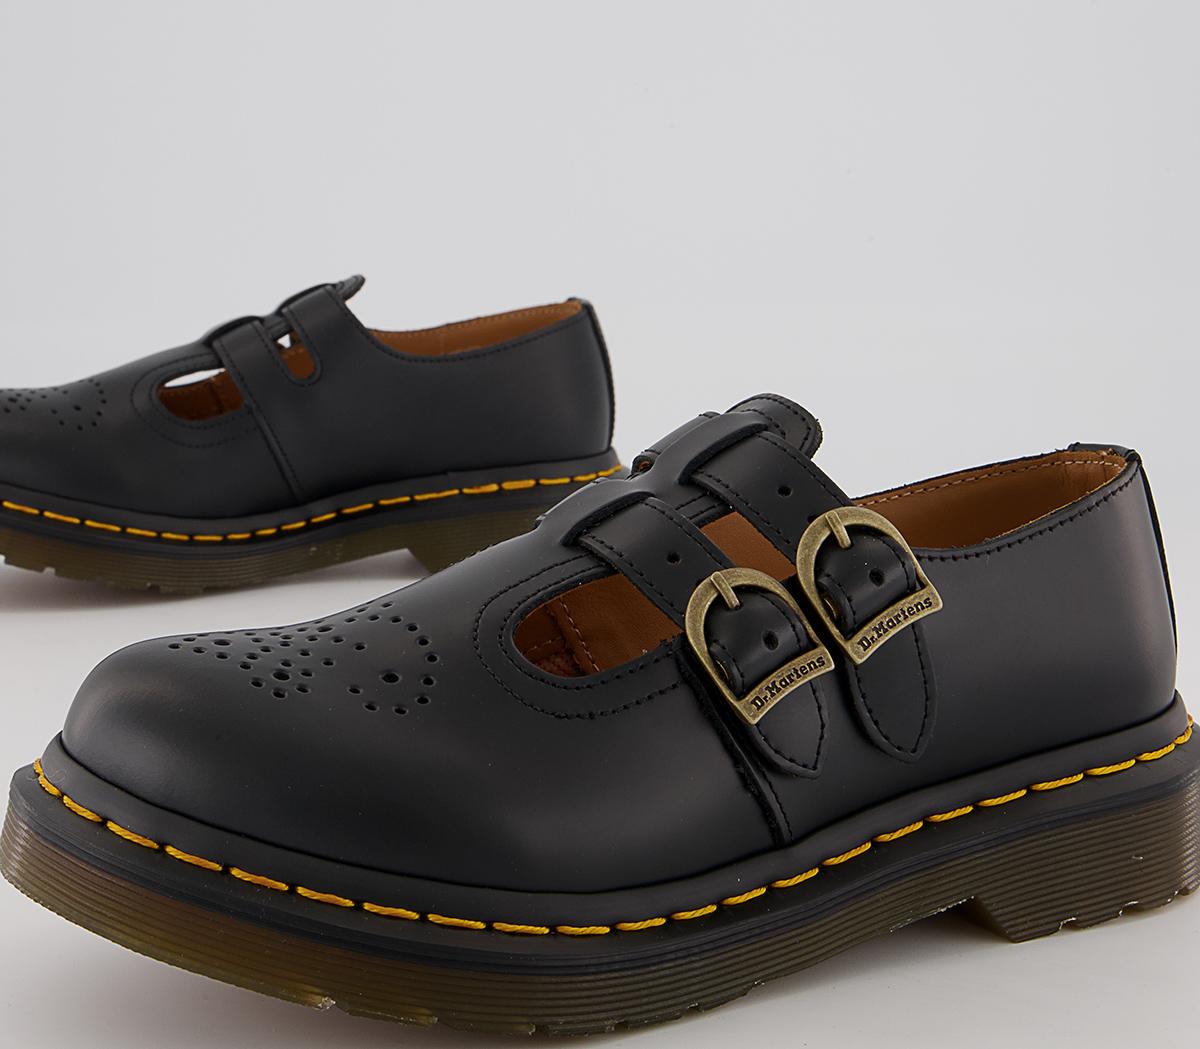 Dr. Martens 8065 Mary Jane Shoes Black - Flat Shoes for Women